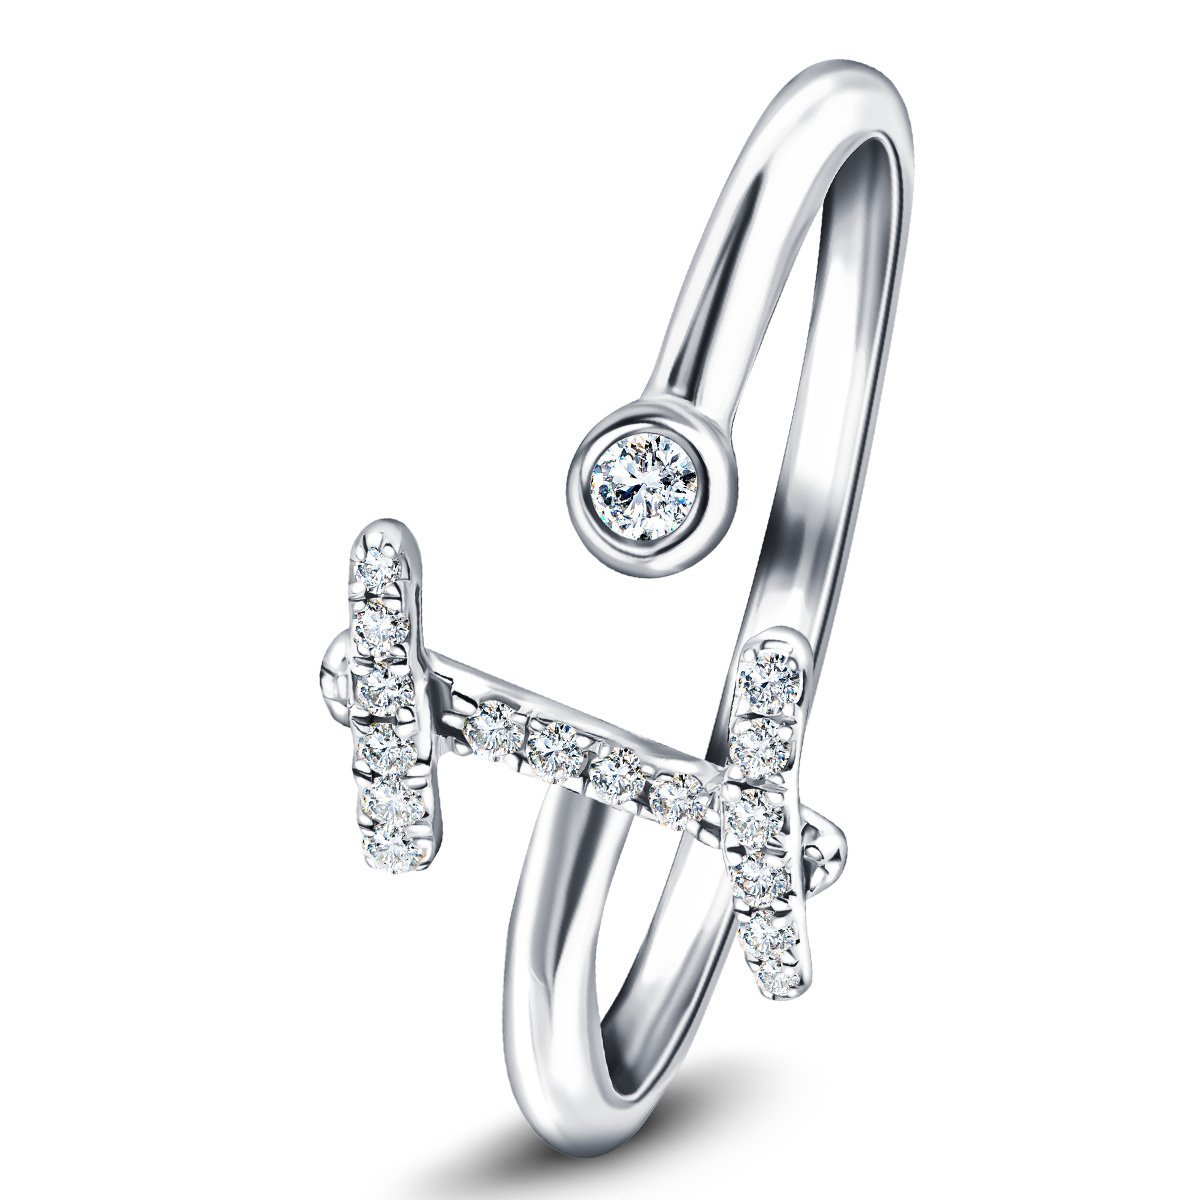 Fancy Diamond Initial 'I' Ring 0.10ct G/SI Quality in 9k White Gold - All Diamond